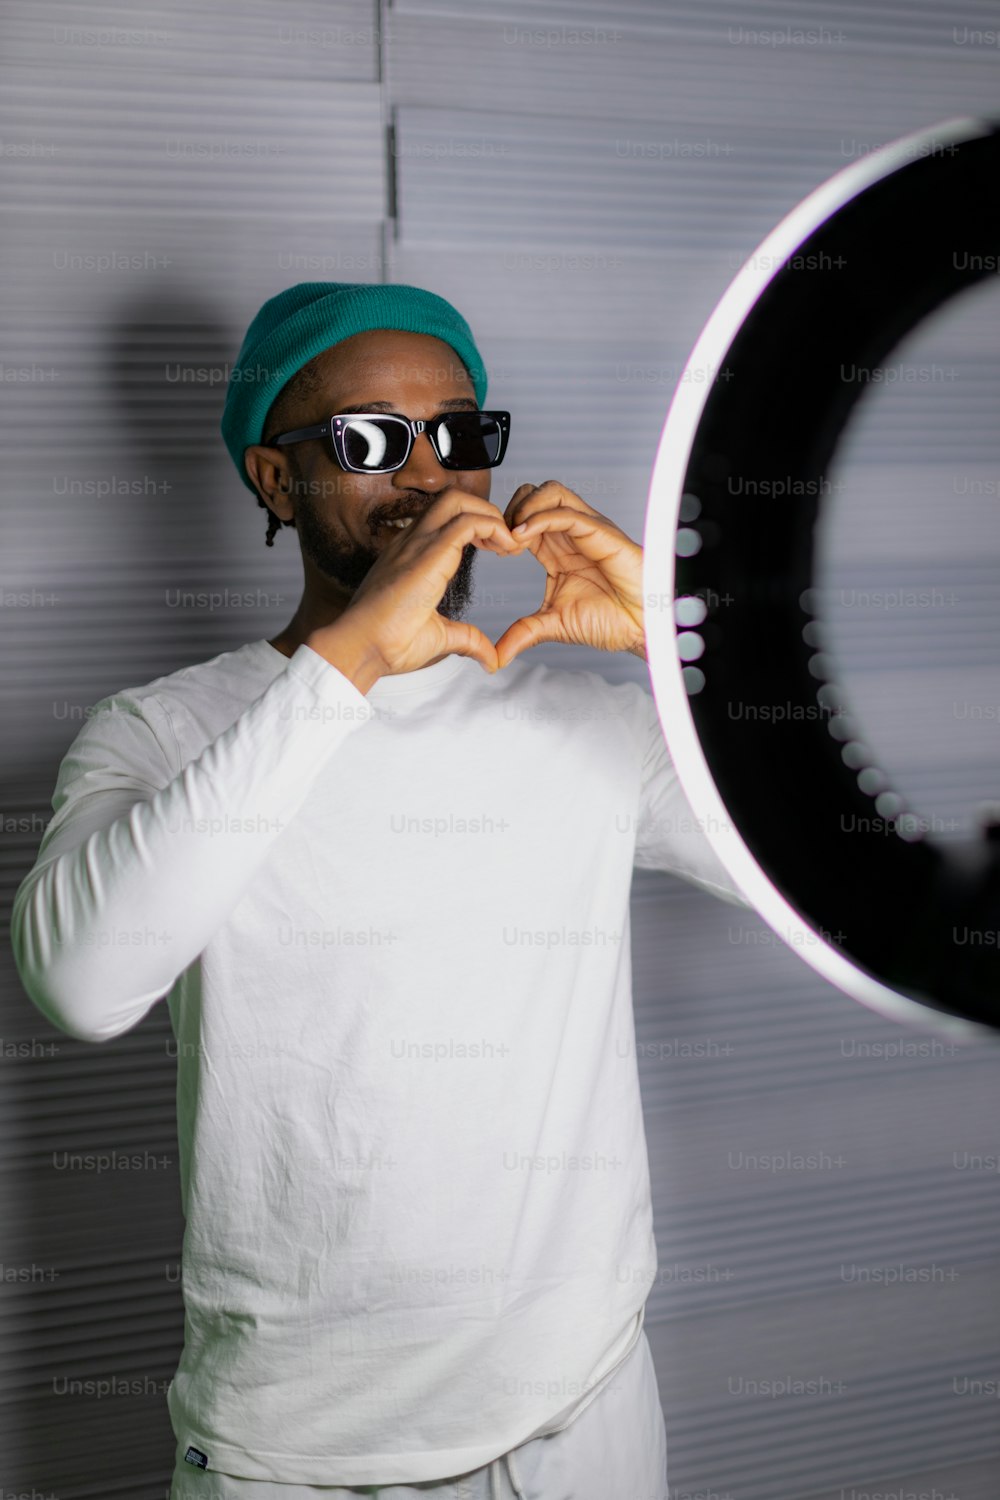 a man wearing sunglasses and a turban making a heart shape with his hands